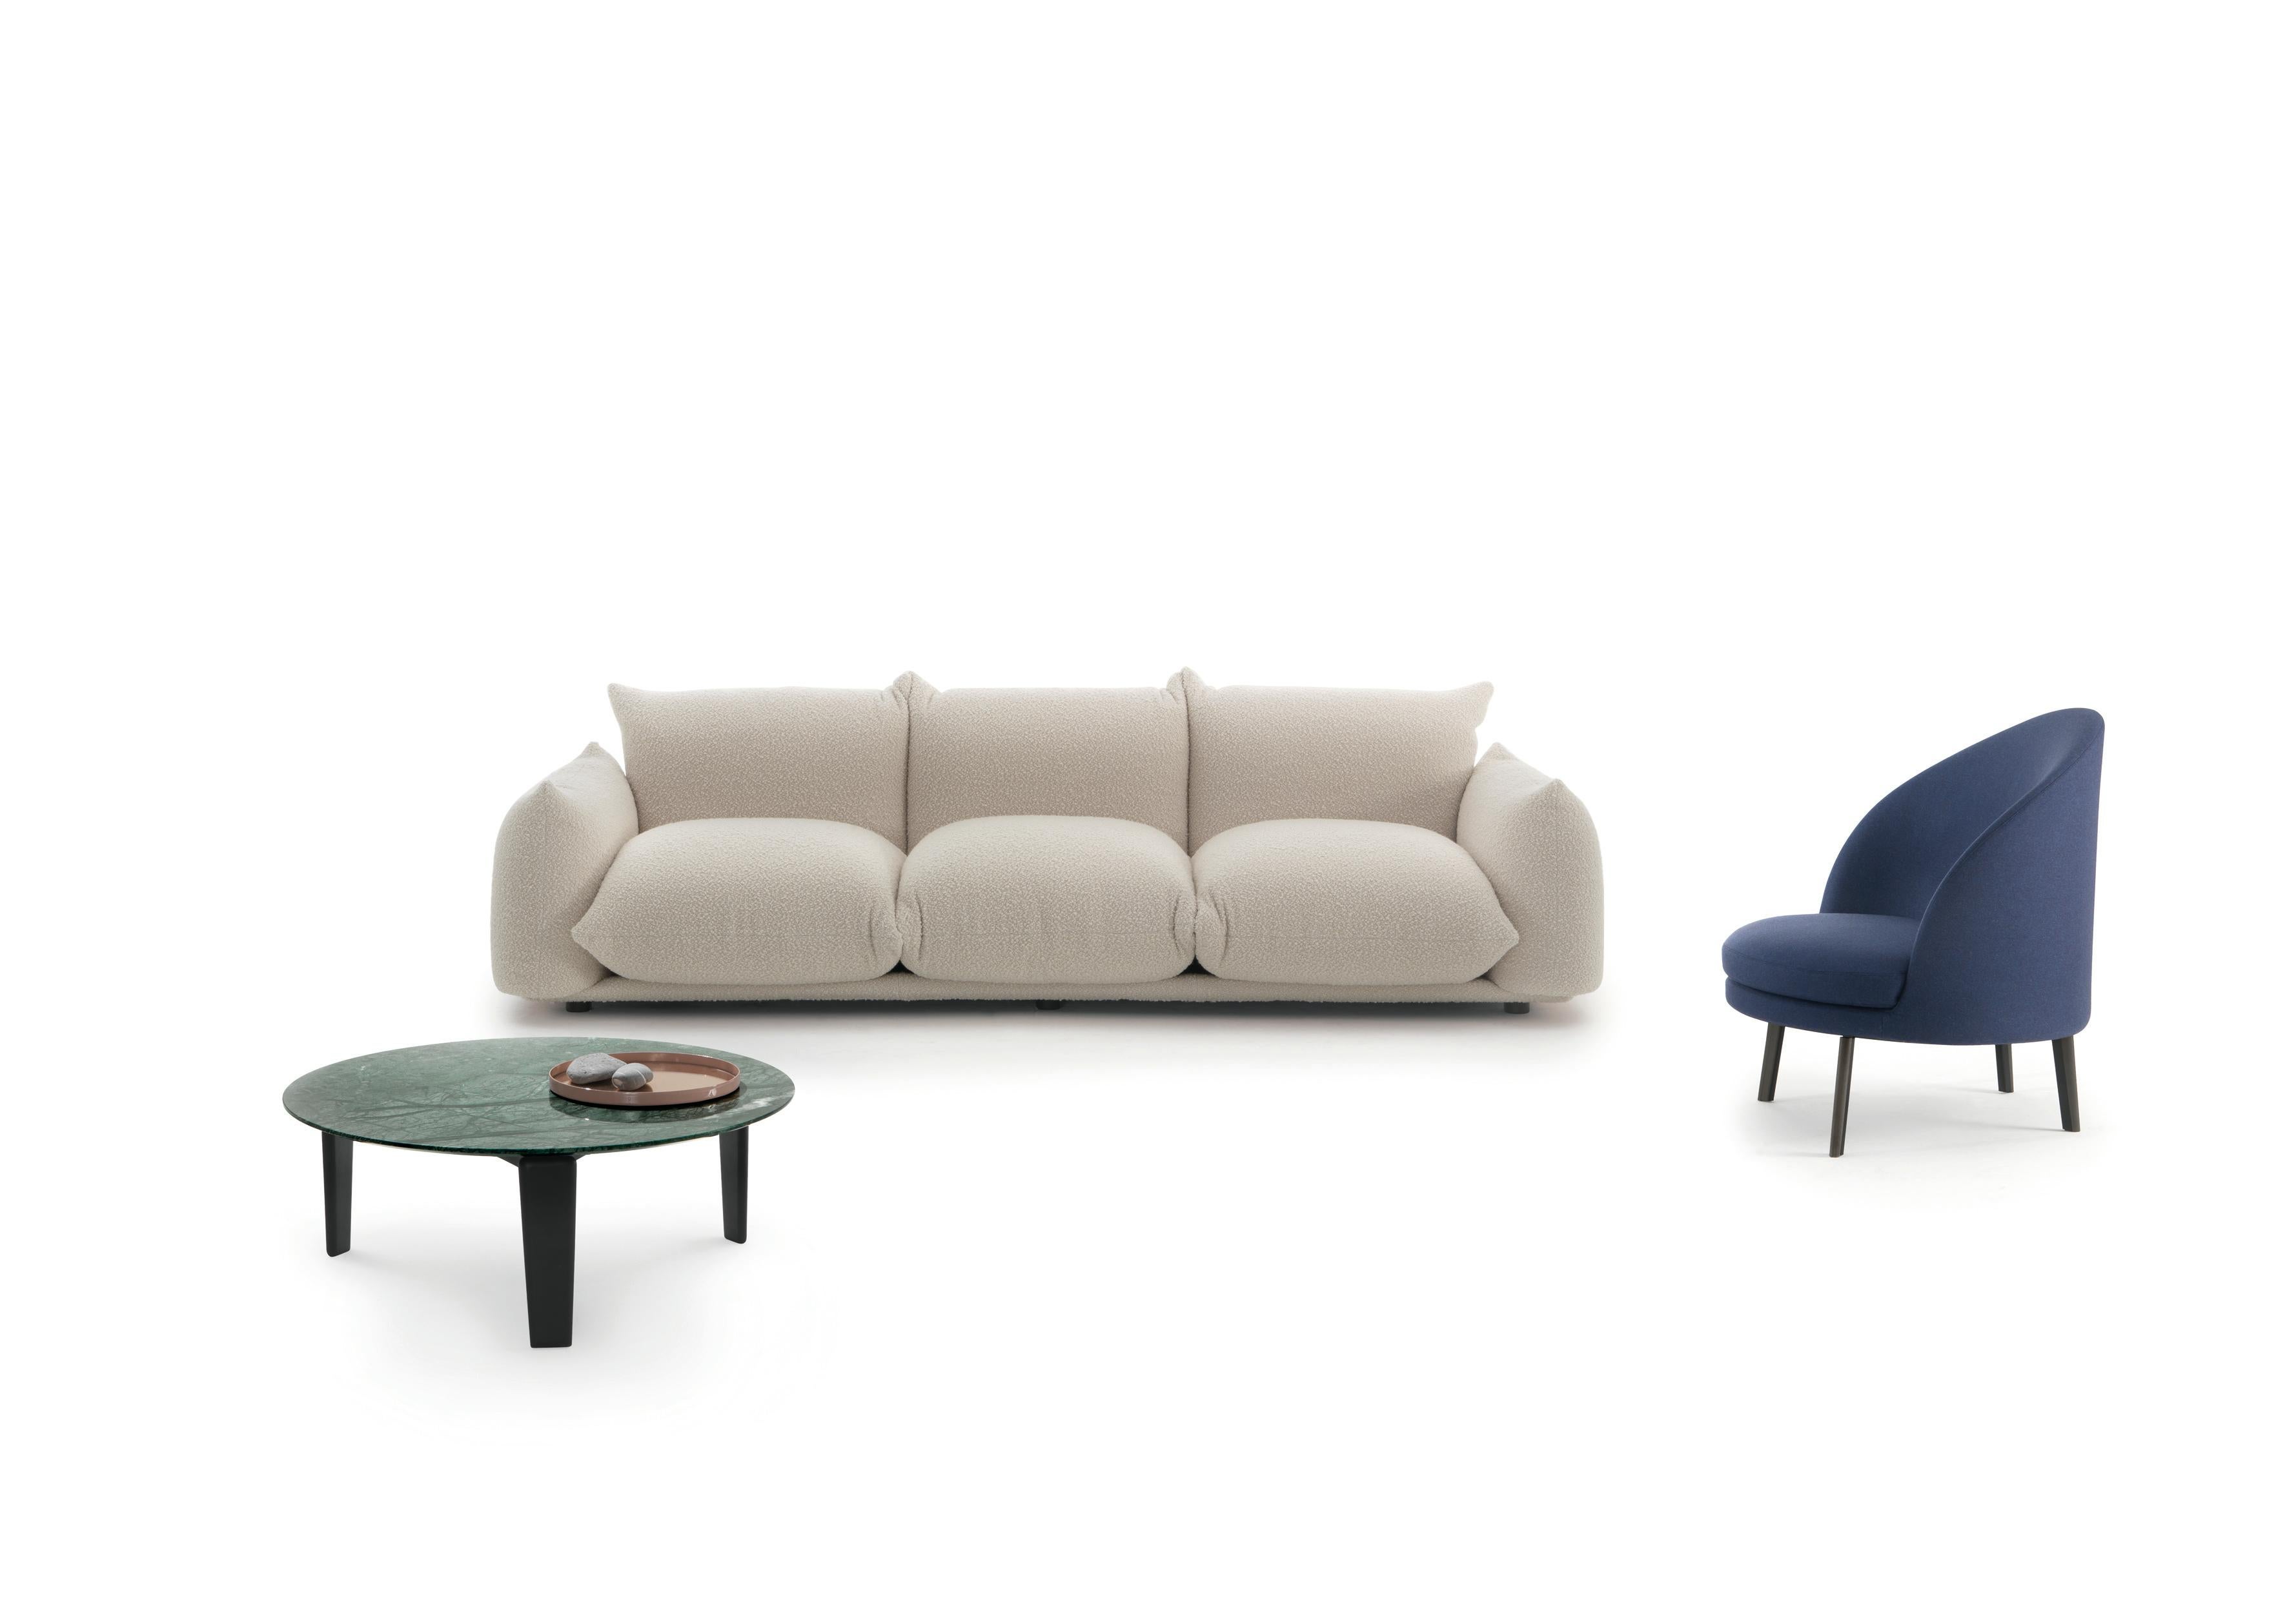 Marenco Sofa is designed by Mario Marenco for Arflex. This sofa features the system with making the armrest and seat as the base portion. There is a metal tubular frame facilitated for accommodating the cushions which provide firm and rigidity to